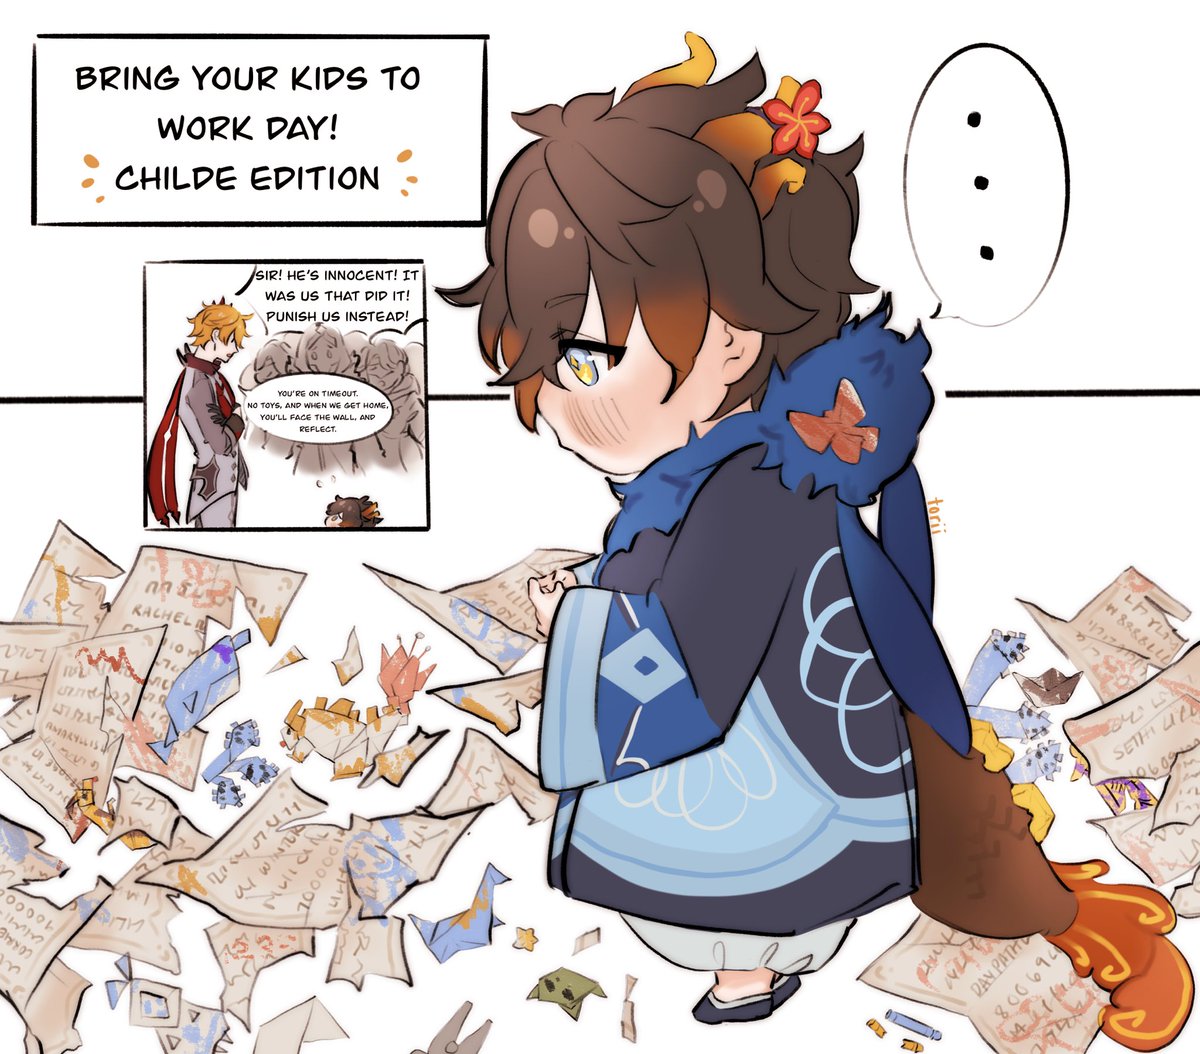 ?[Bring your kids to work day!]
The result? Baby tartali managed to get some debt papers and drew on them and made origami.
By the end of the day, some people were debt free by tartali baby, but in exchange, got in trouble by his dad.?️
#tartali #tartalibaby 